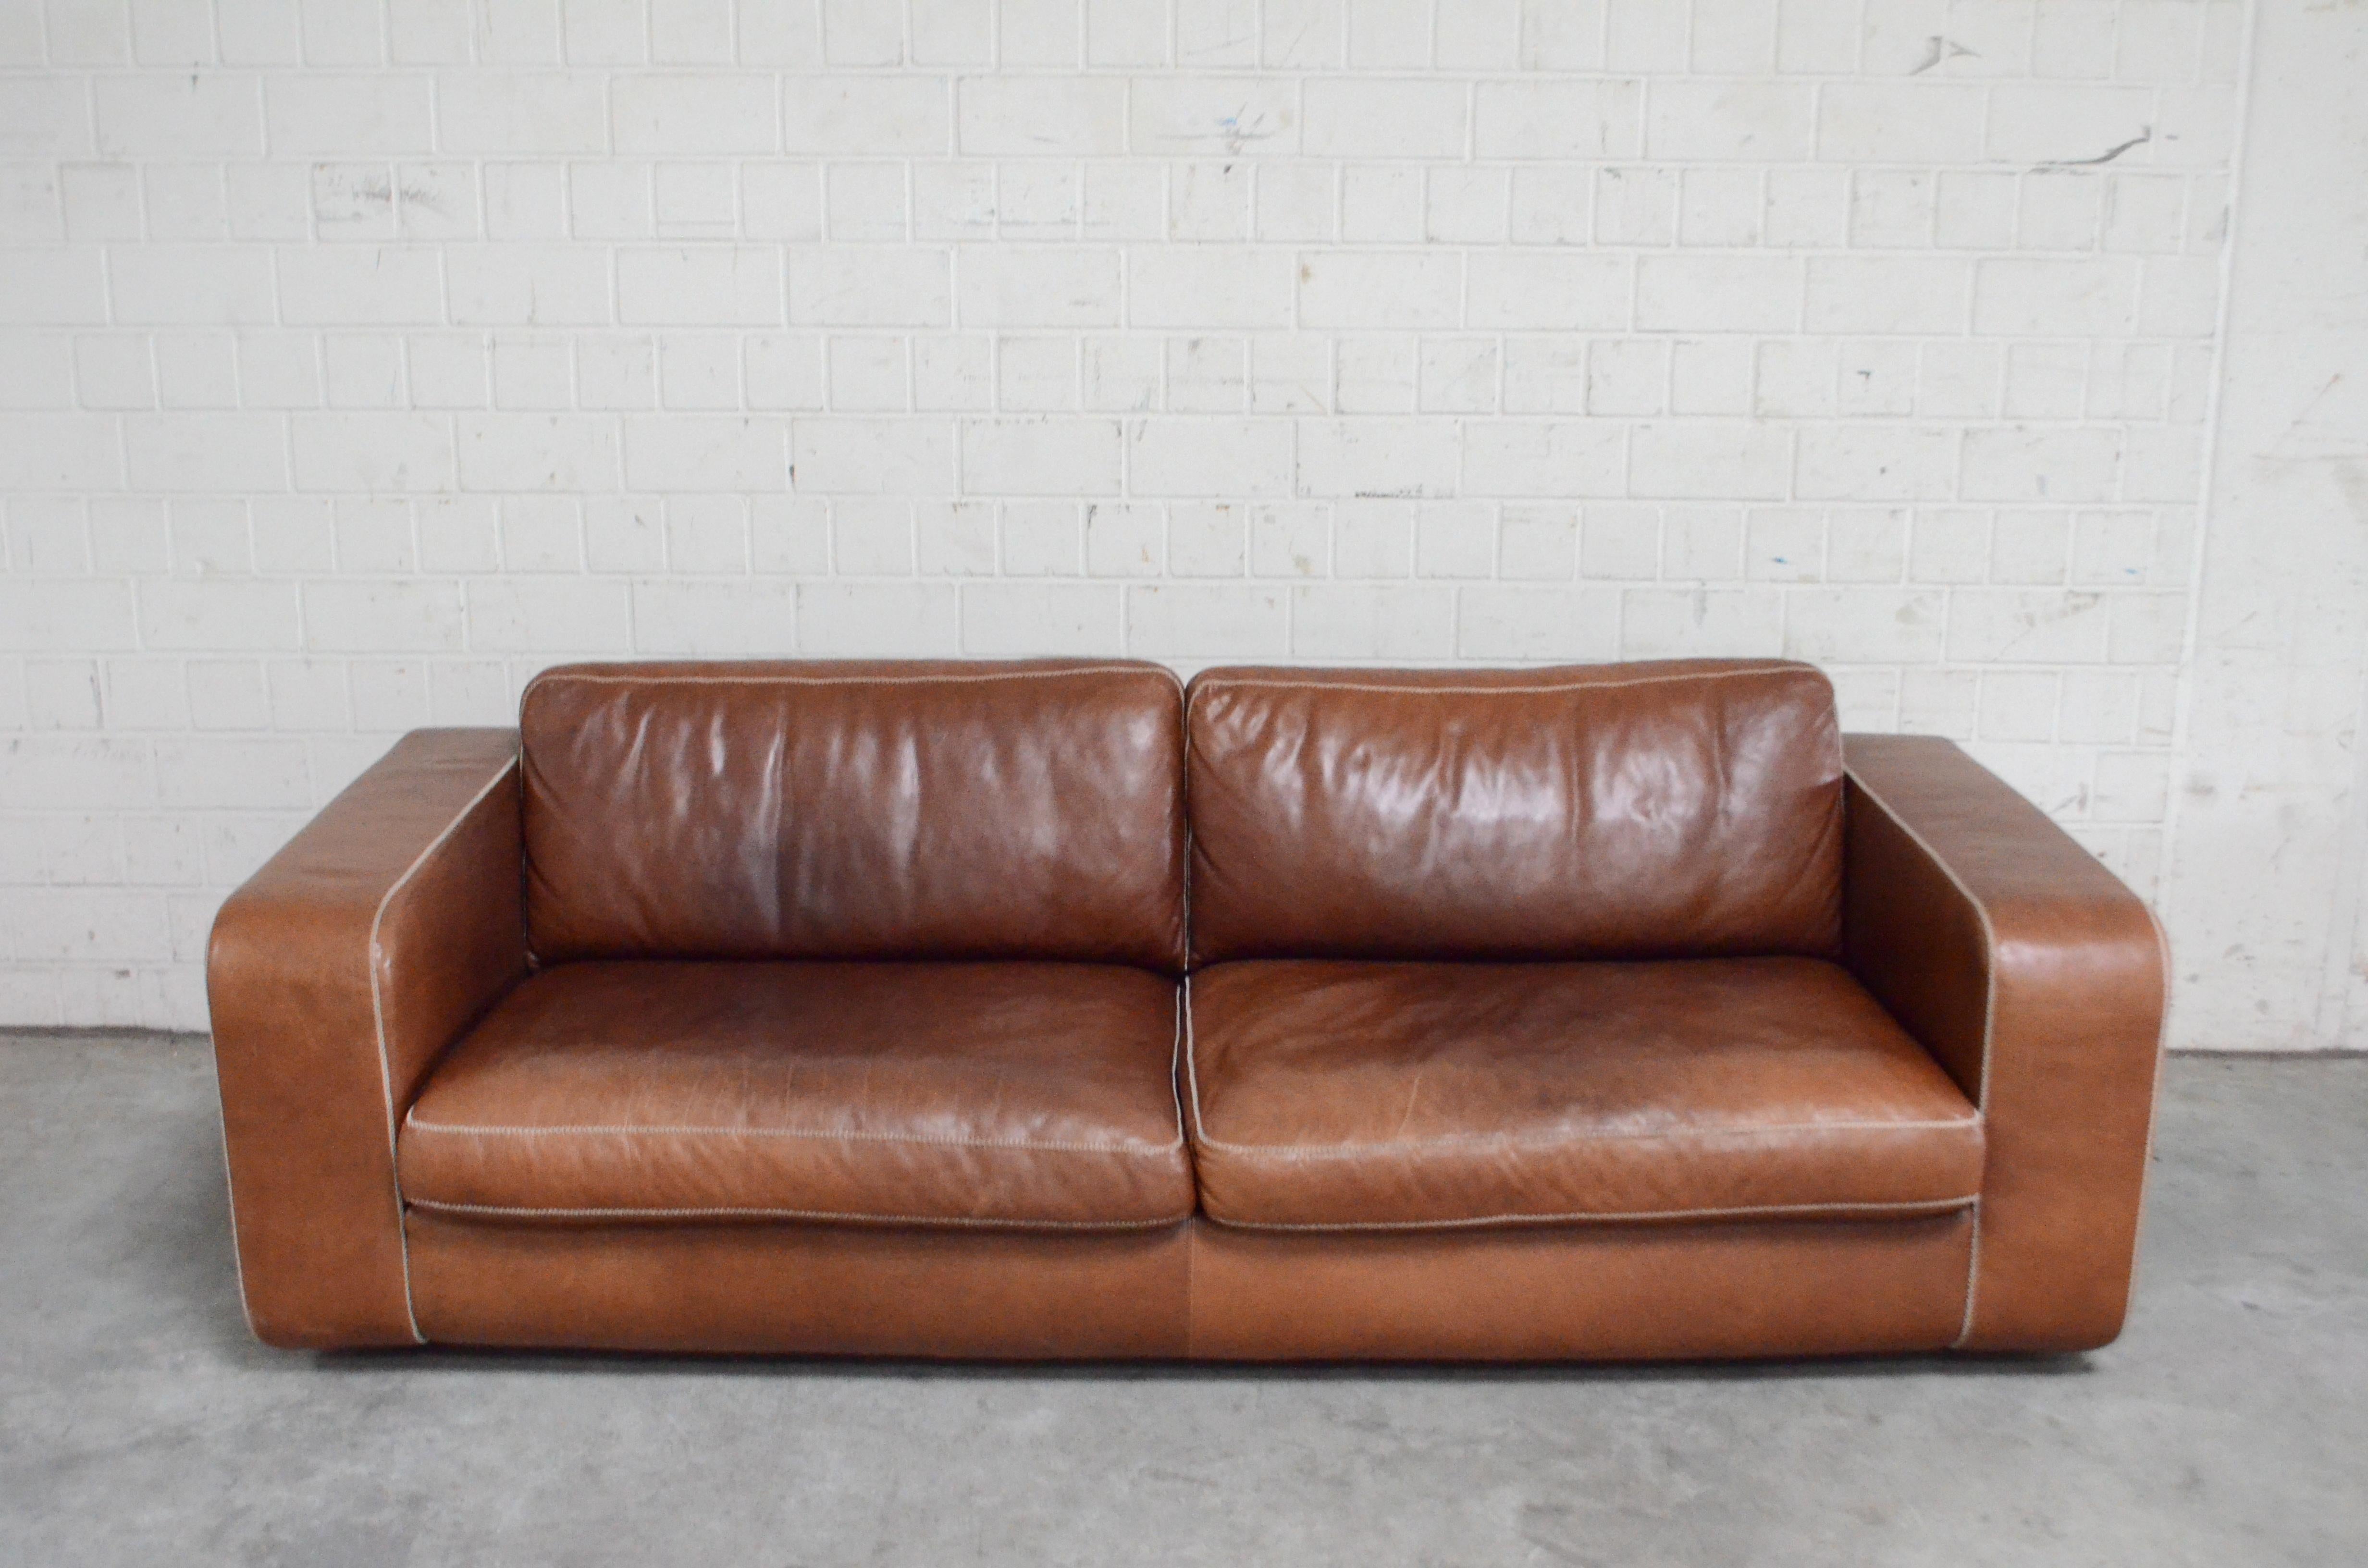 Machalke leather sofa in cognac aniline leather and white cross seam stitches.
Model Valentino.
Design Michael Schilte.
Great patina.
Machalke is a German furniture company with manufactures high quality craftmanship leather seating furniture as